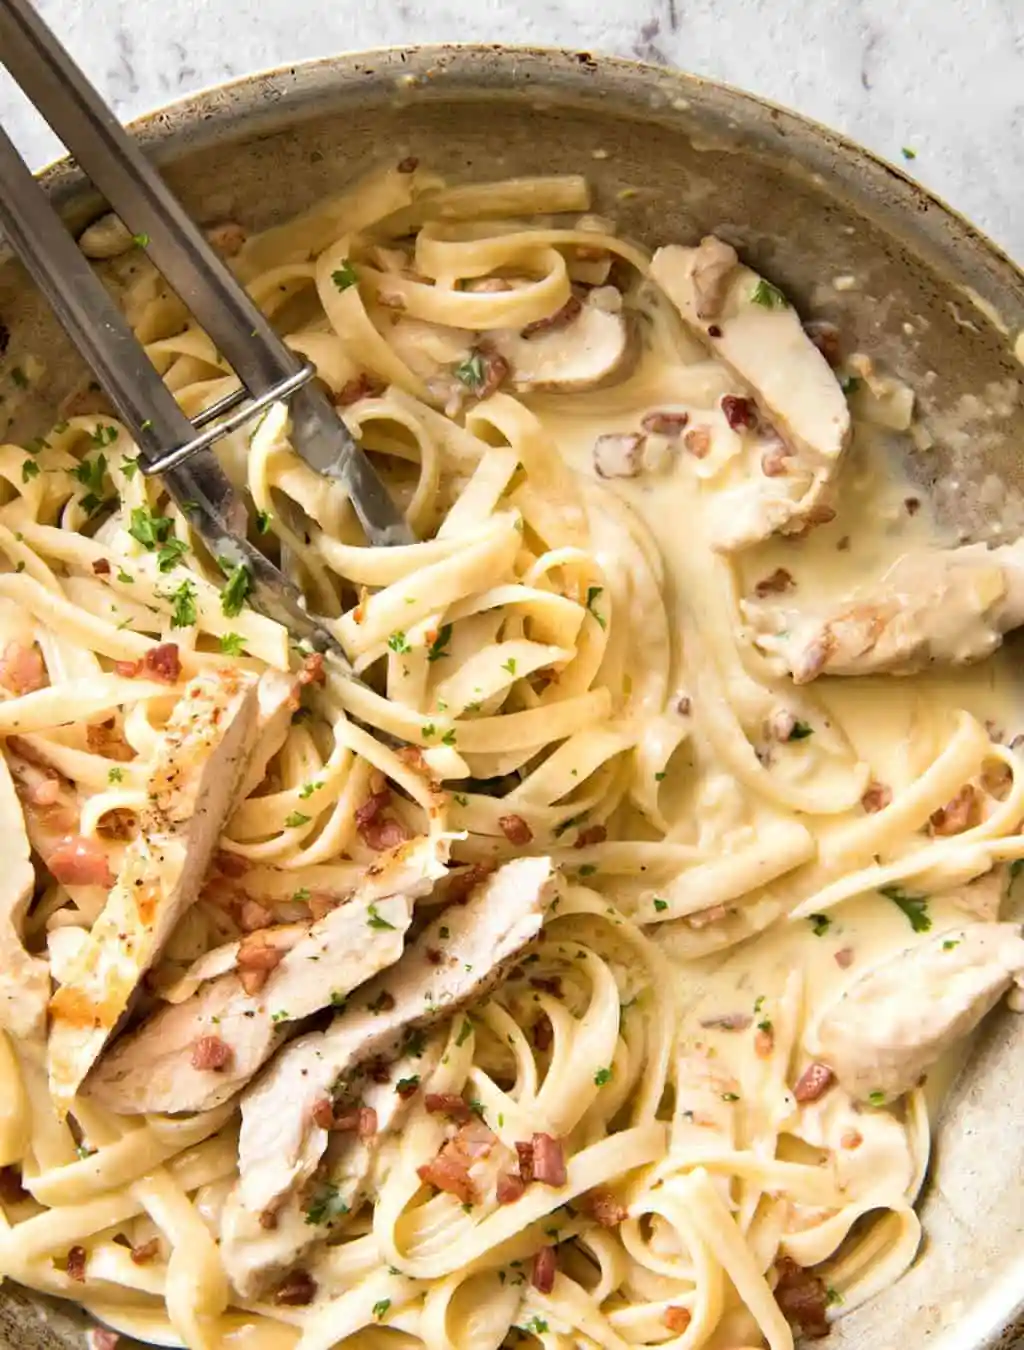 Chicken, Bacon and Pasta in a creamey sauce